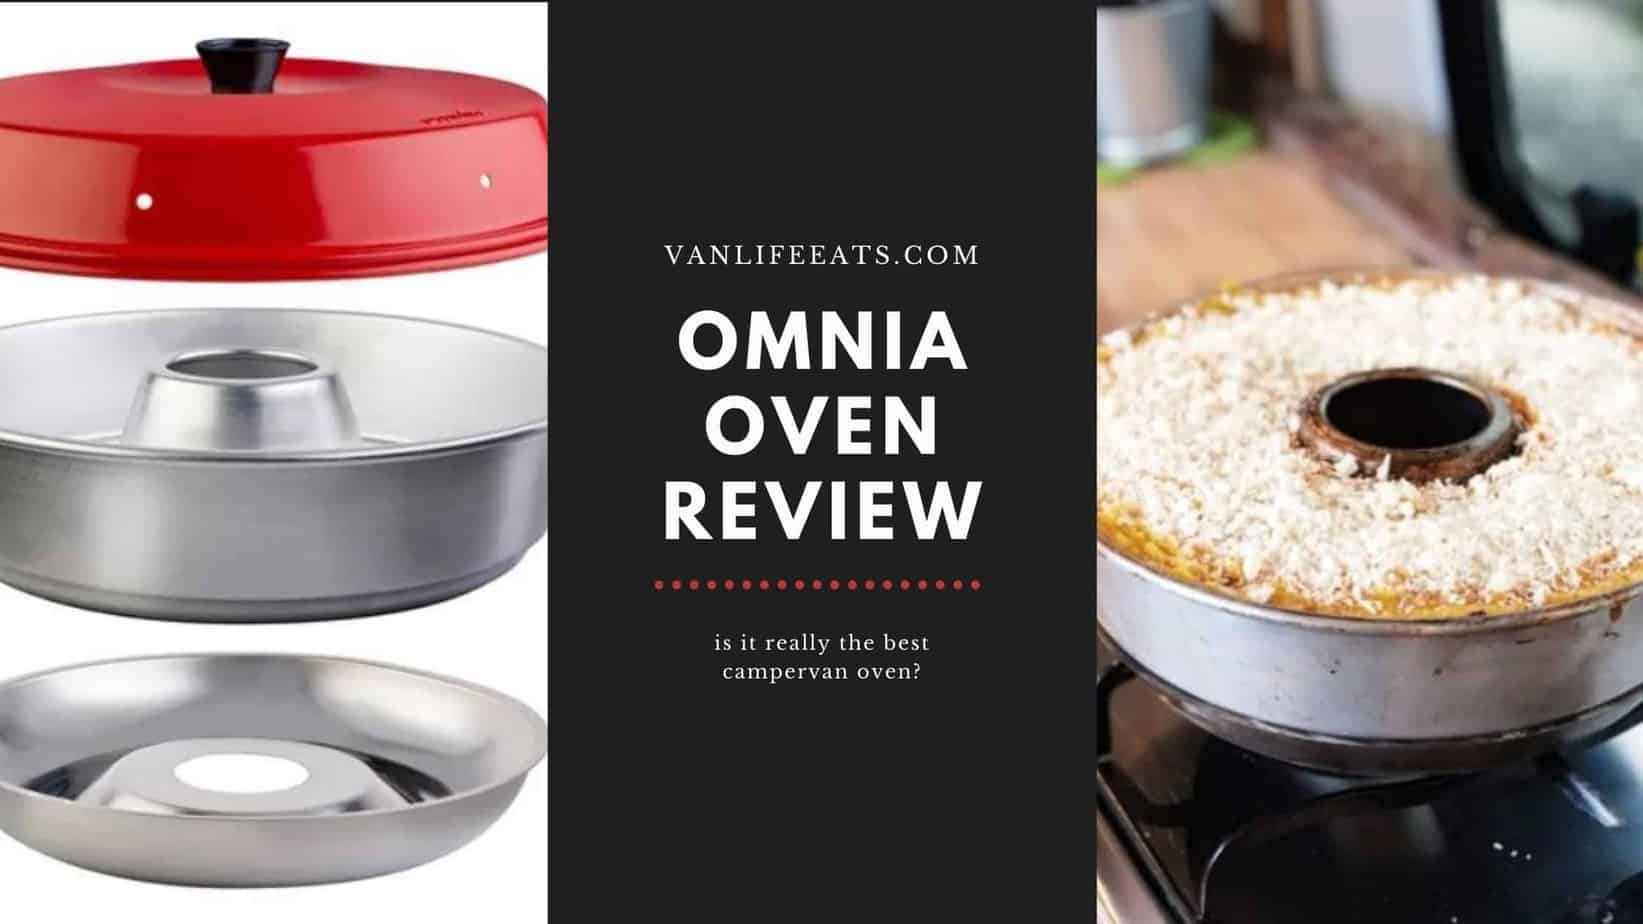 Omnia oven for campers, sailors and at Tinyhouse 